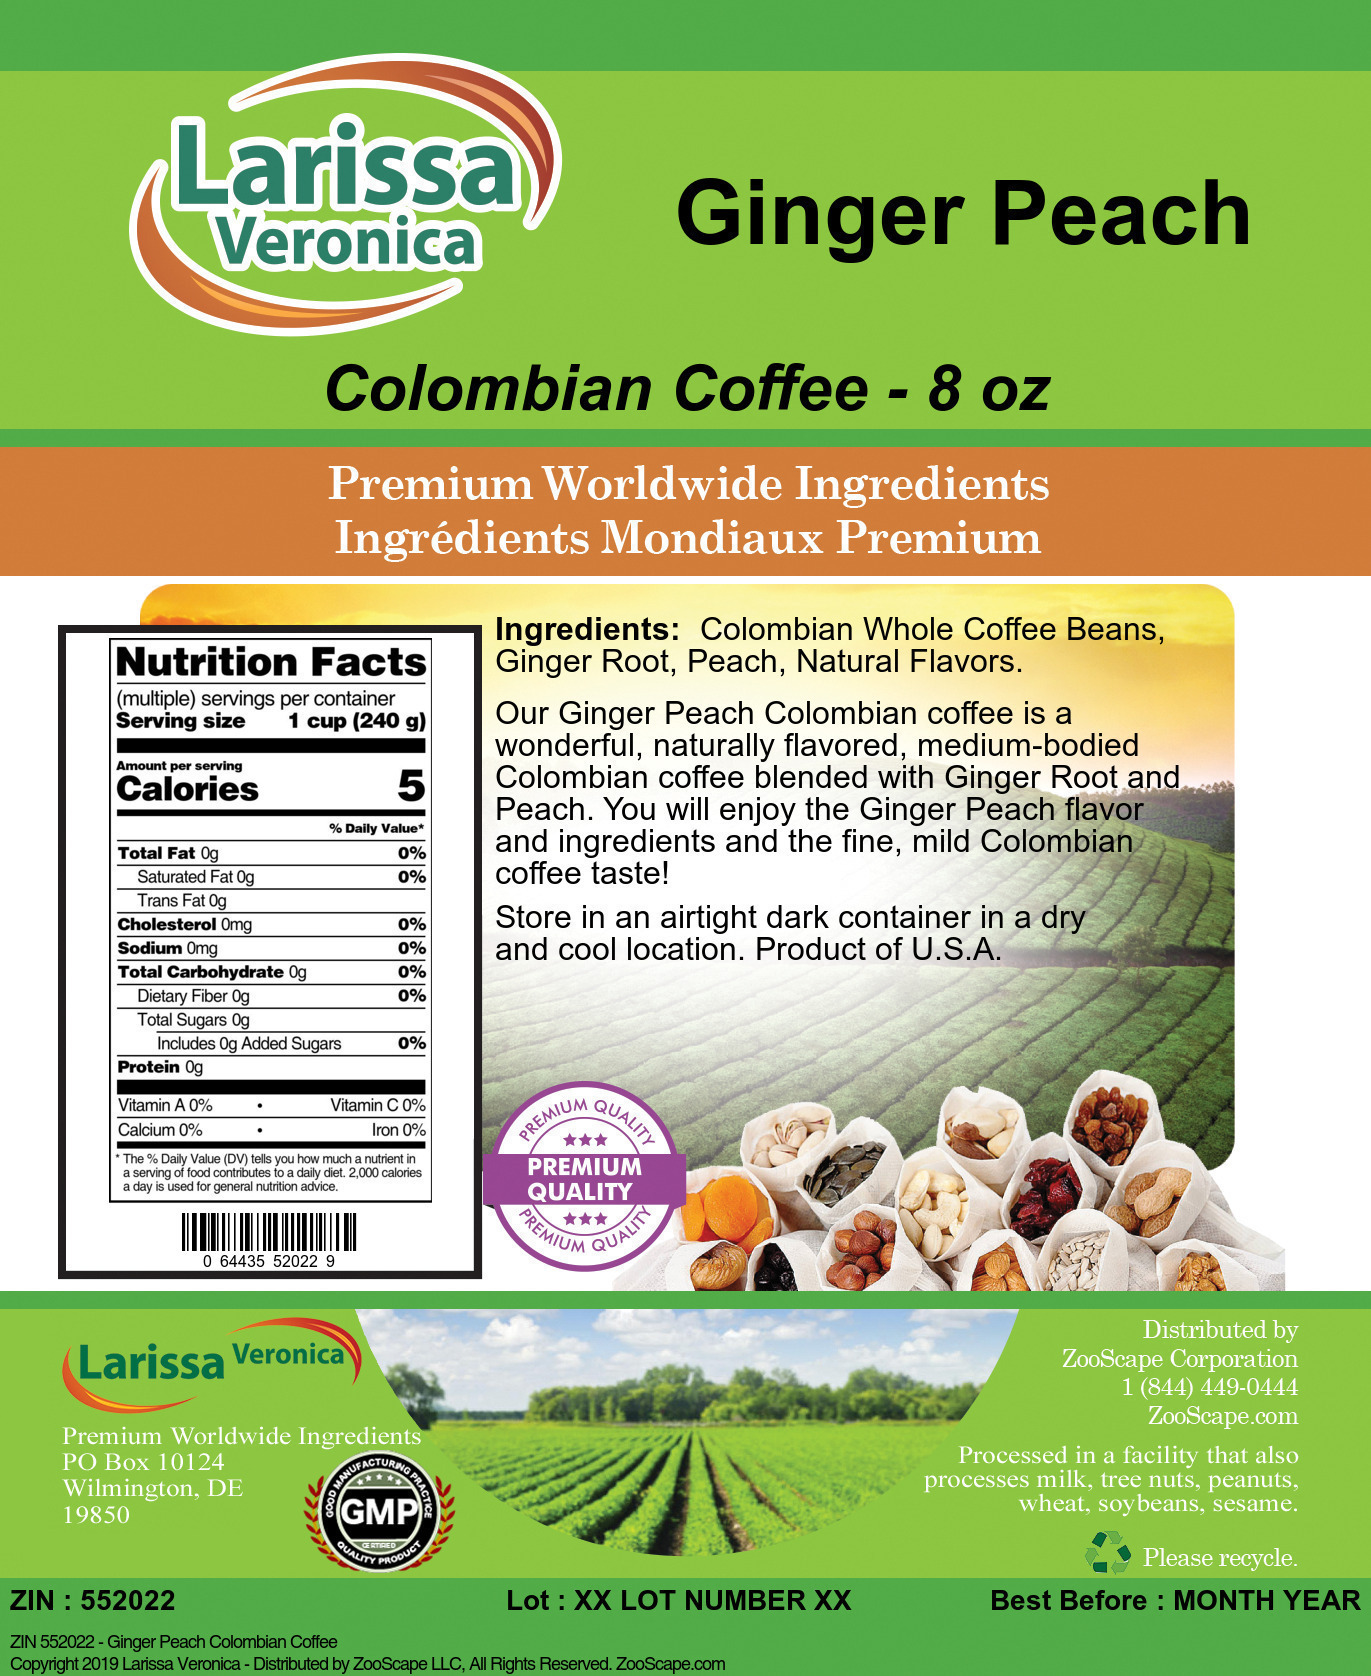 Ginger Peach Colombian Coffee - Label